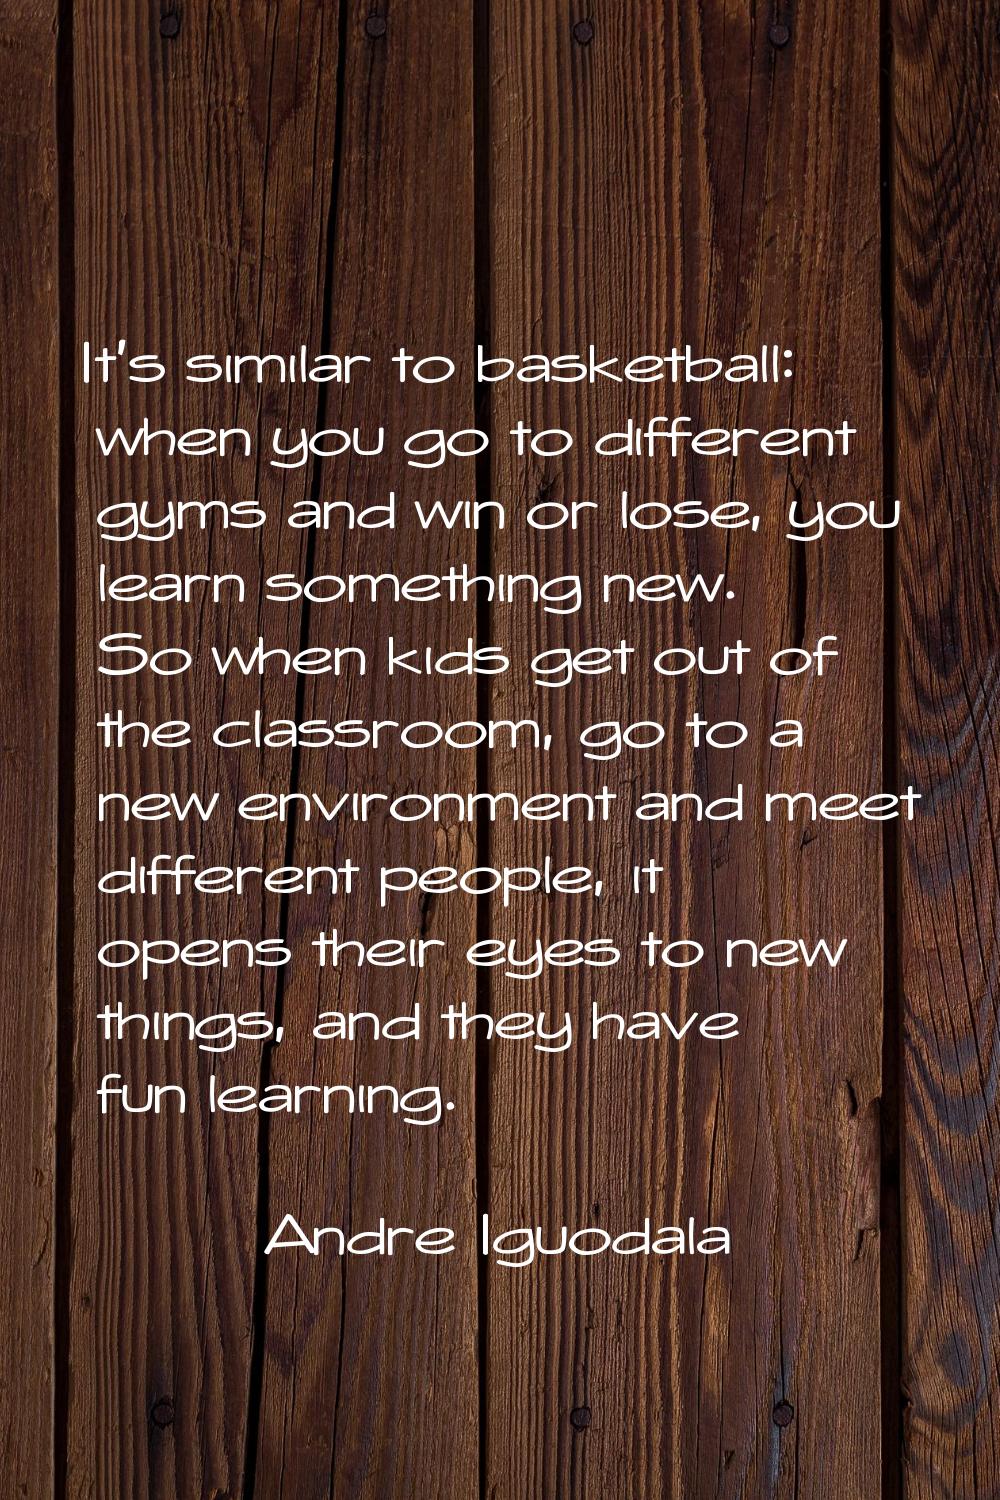 It's similar to basketball: when you go to different gyms and win or lose, you learn something new.